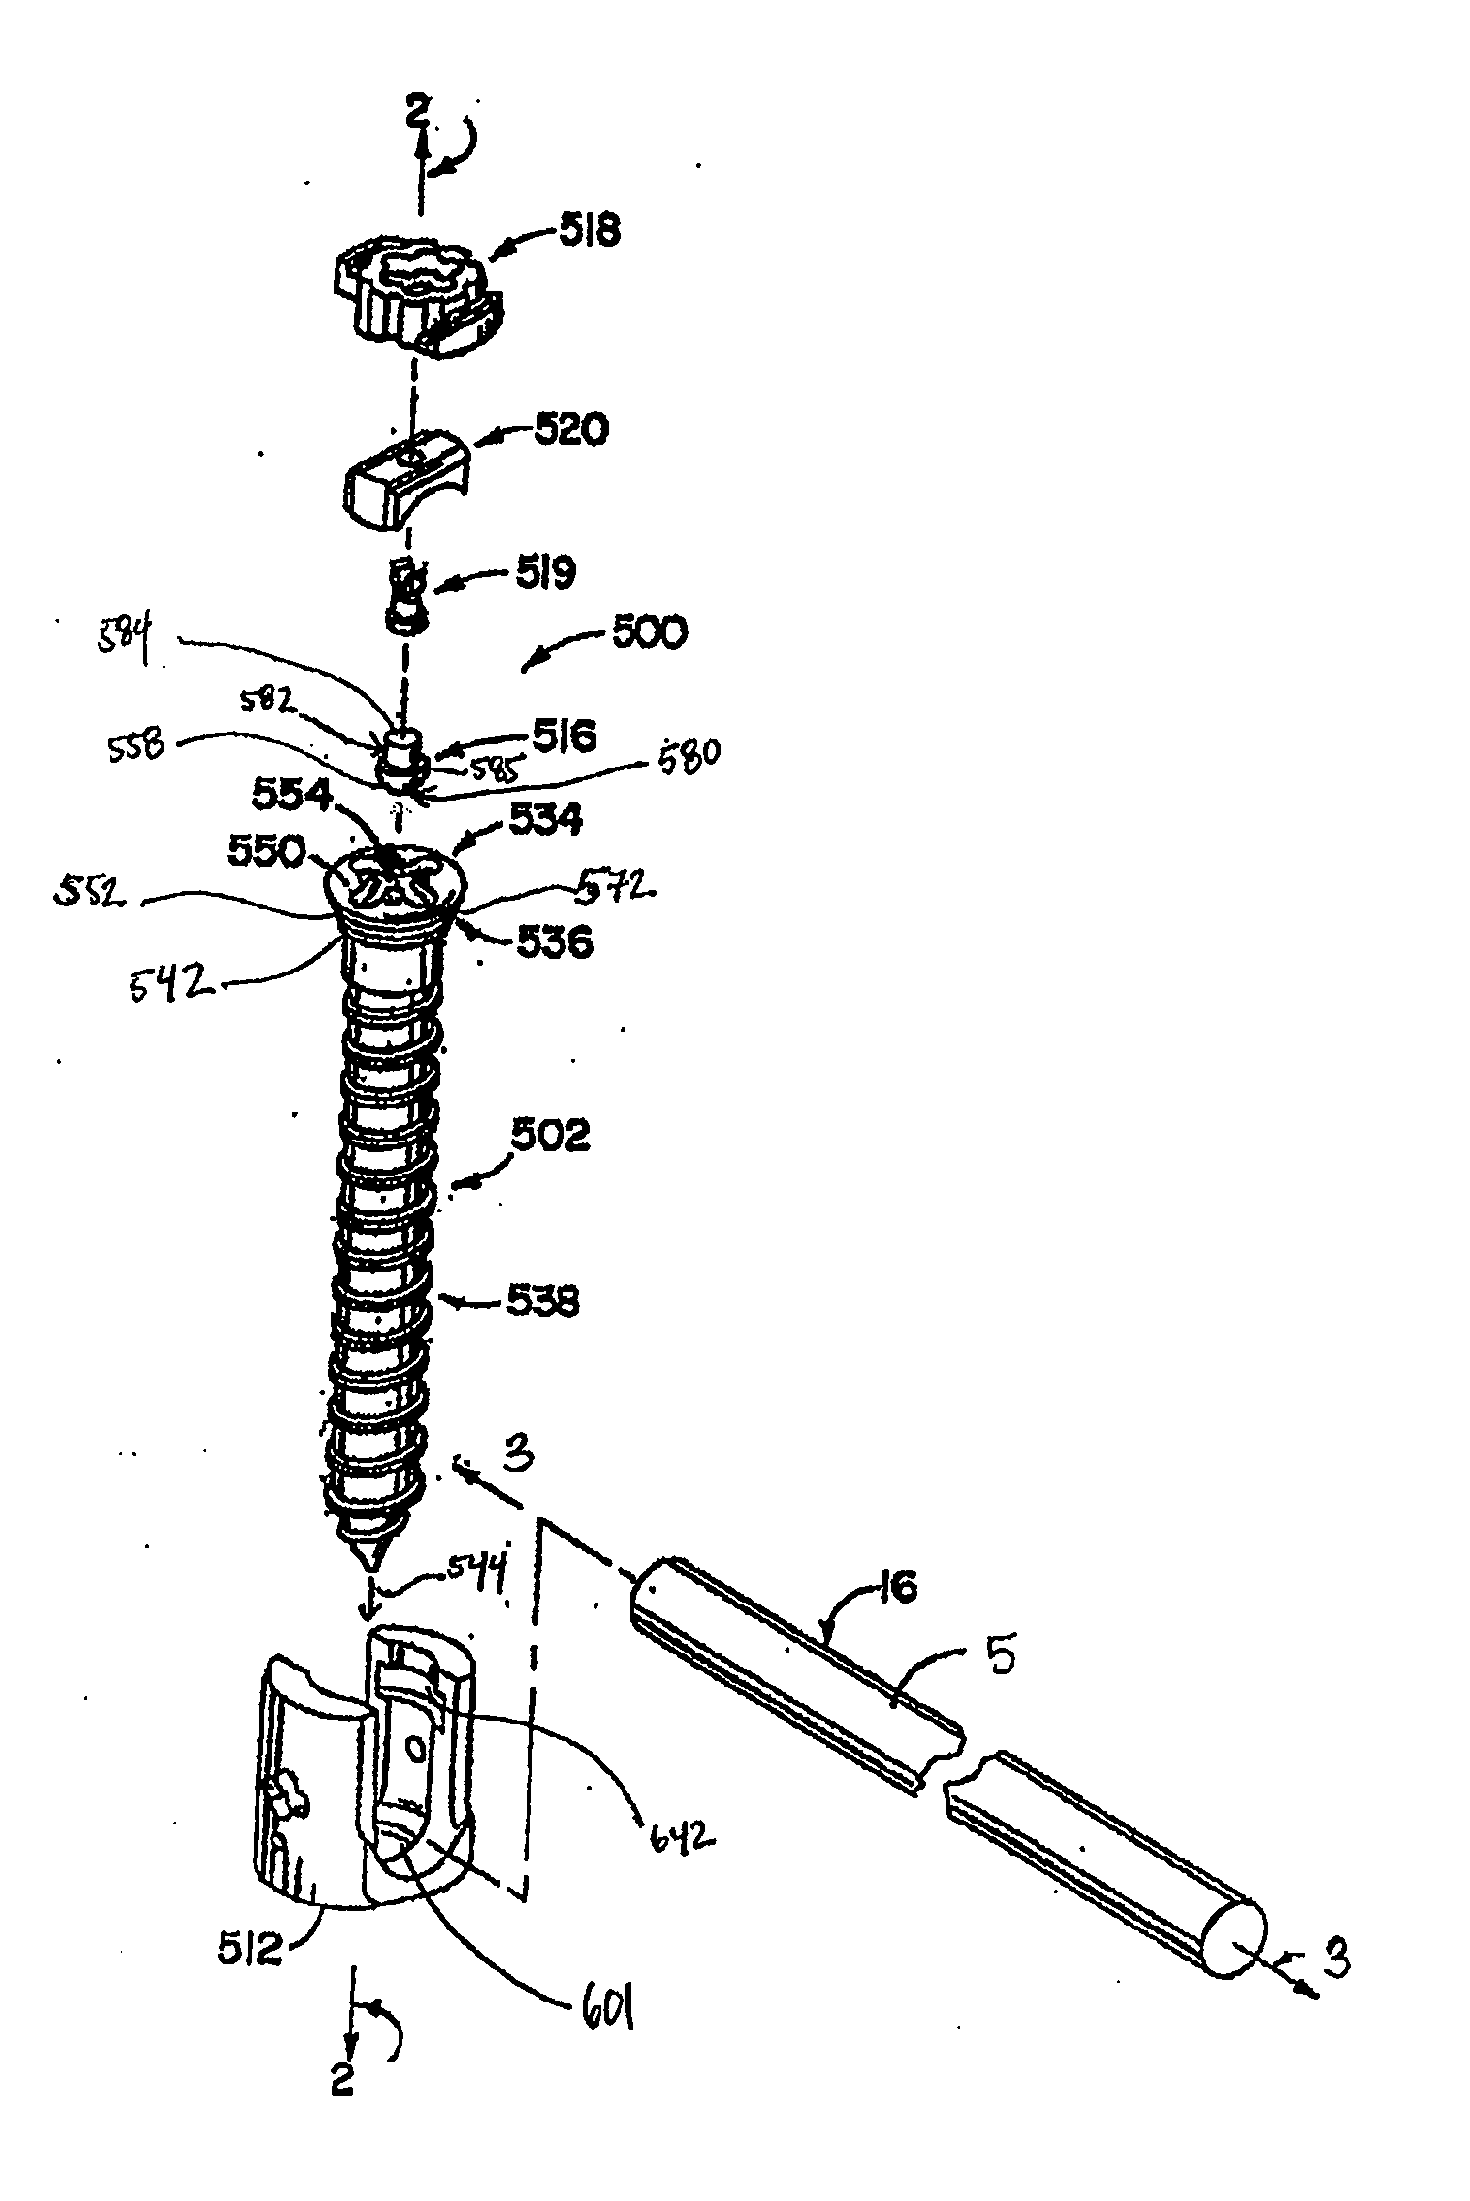 Minimally Invasive Surgical System